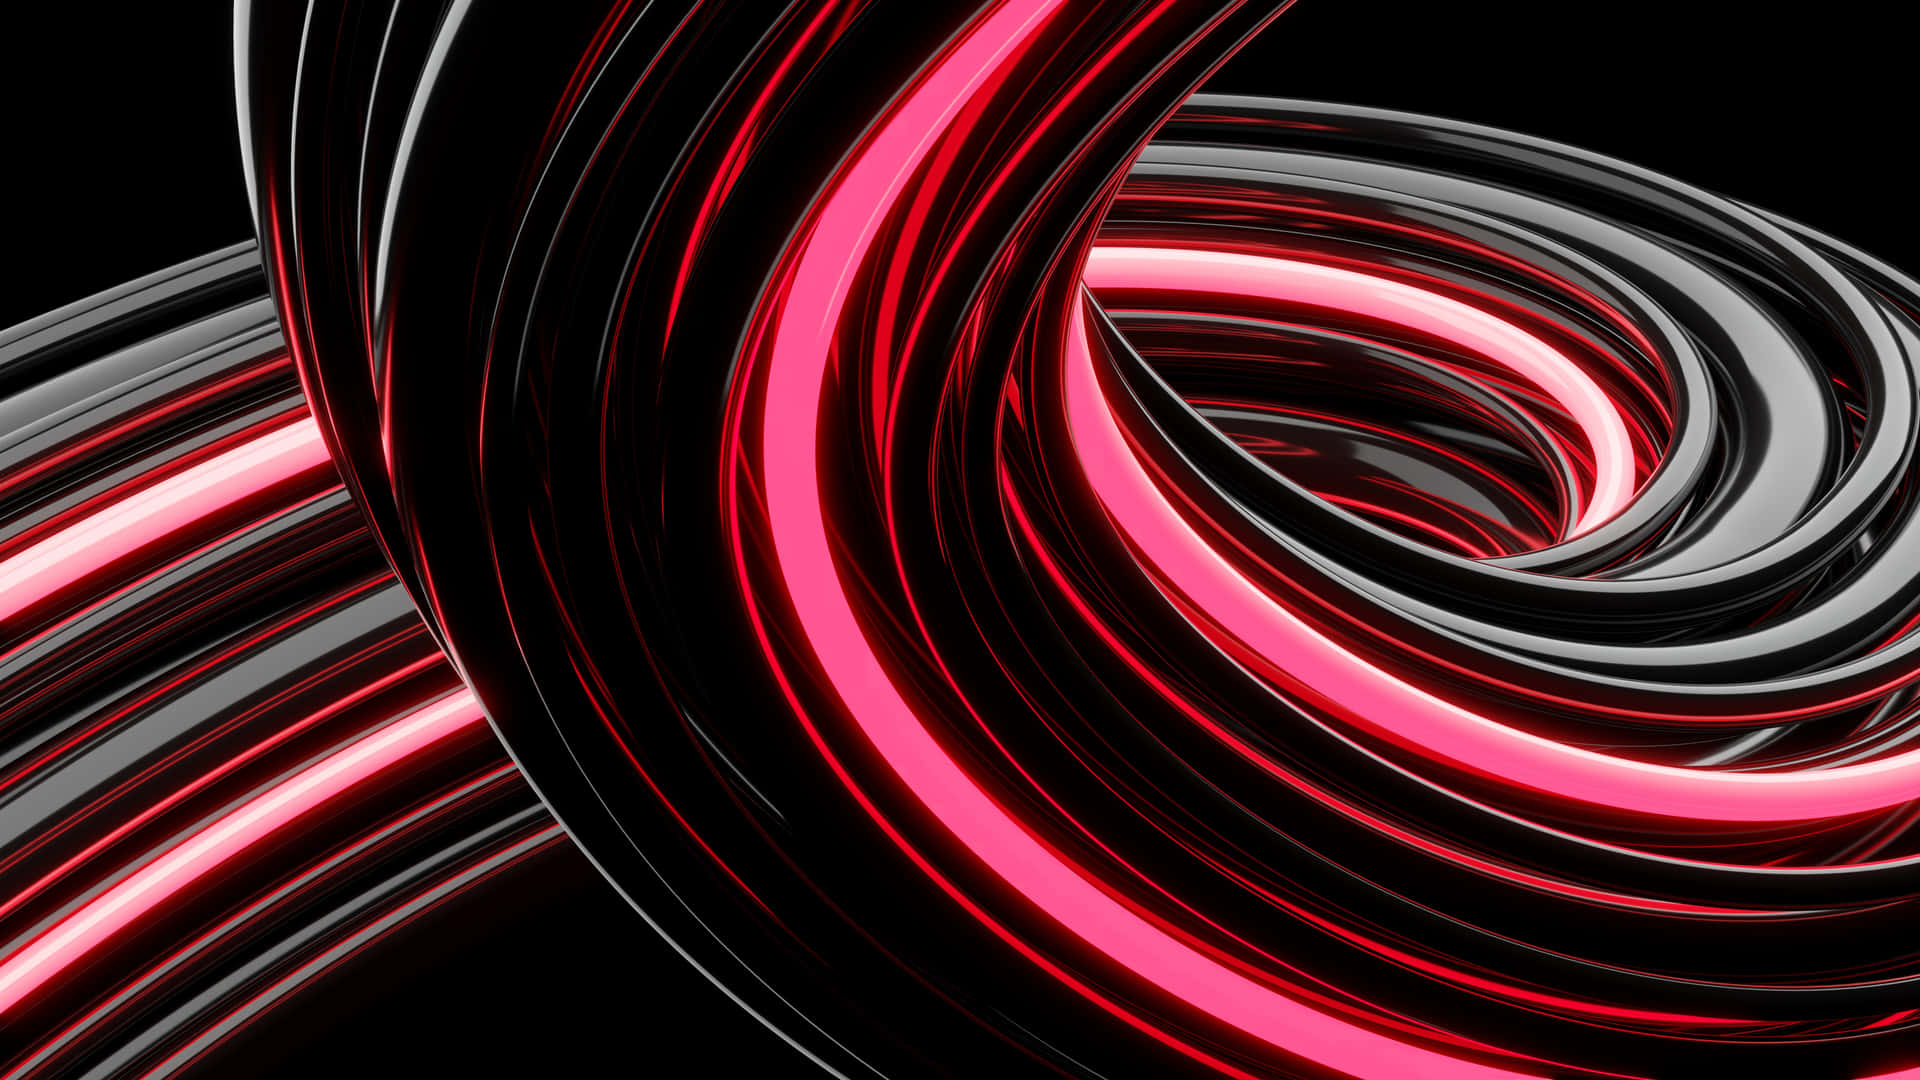 A Black Background With Red And Pink Swirls